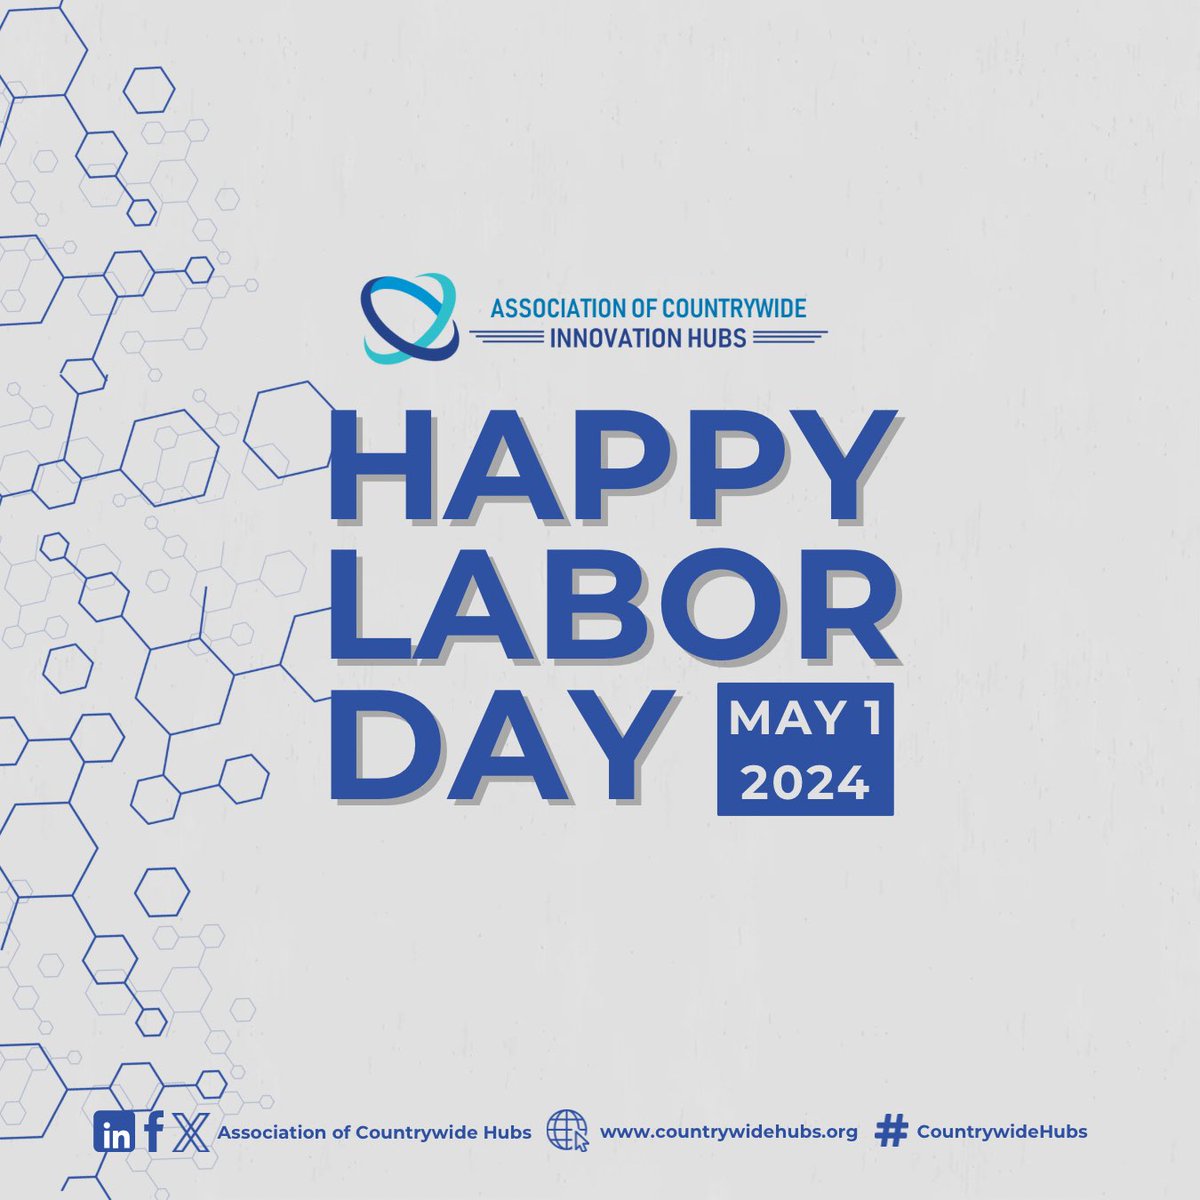 Today, we celebrate the hard work, dedication, and contributions of workers everywhere. Whether you're a startup founder, an innovator, or an advocate for change, your efforts are shaping the future. Let's continue to build together for a brighter tomorrow! #LabourDay